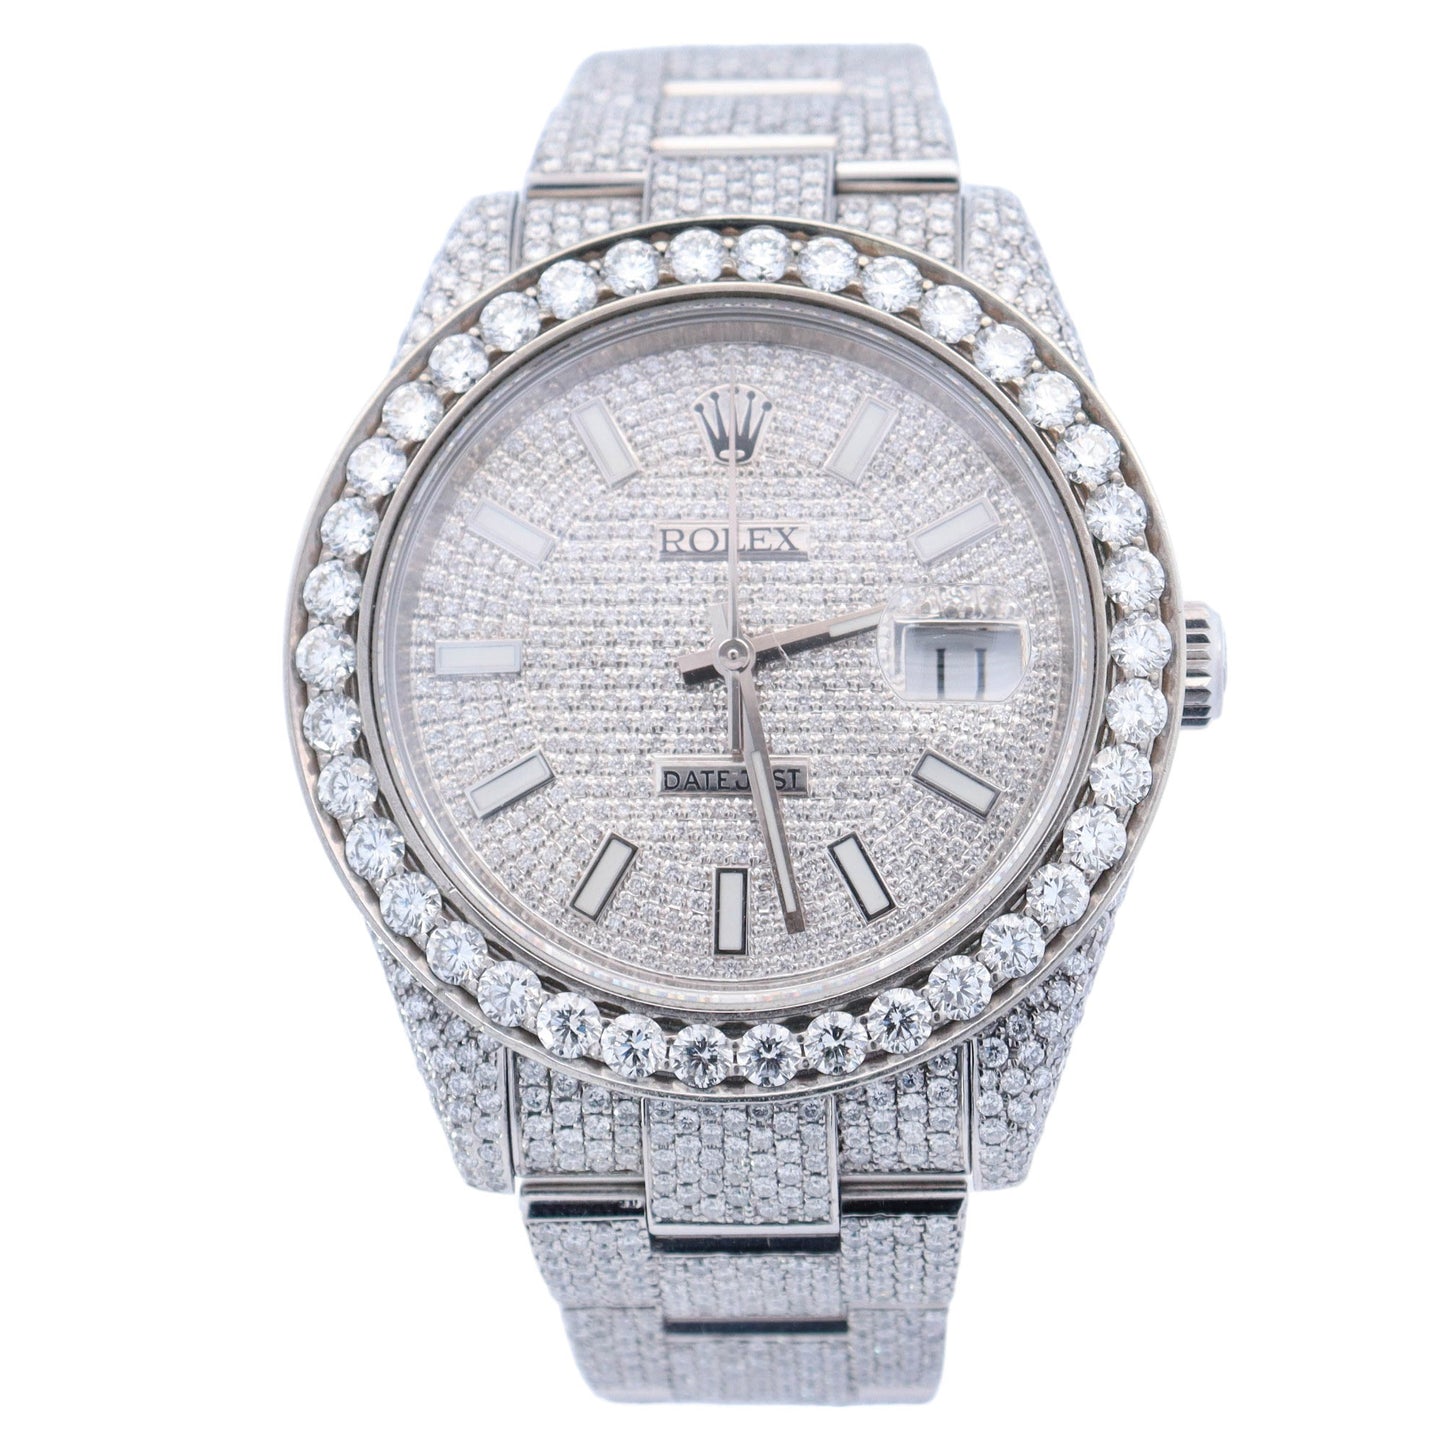 Rolex Datejust 41mm Iced Out Stainless Steel Custom Pave Diamond Stick Dial Watch Reference# 126300 - Happy Jewelers Fine Jewelry Lifetime Warranty